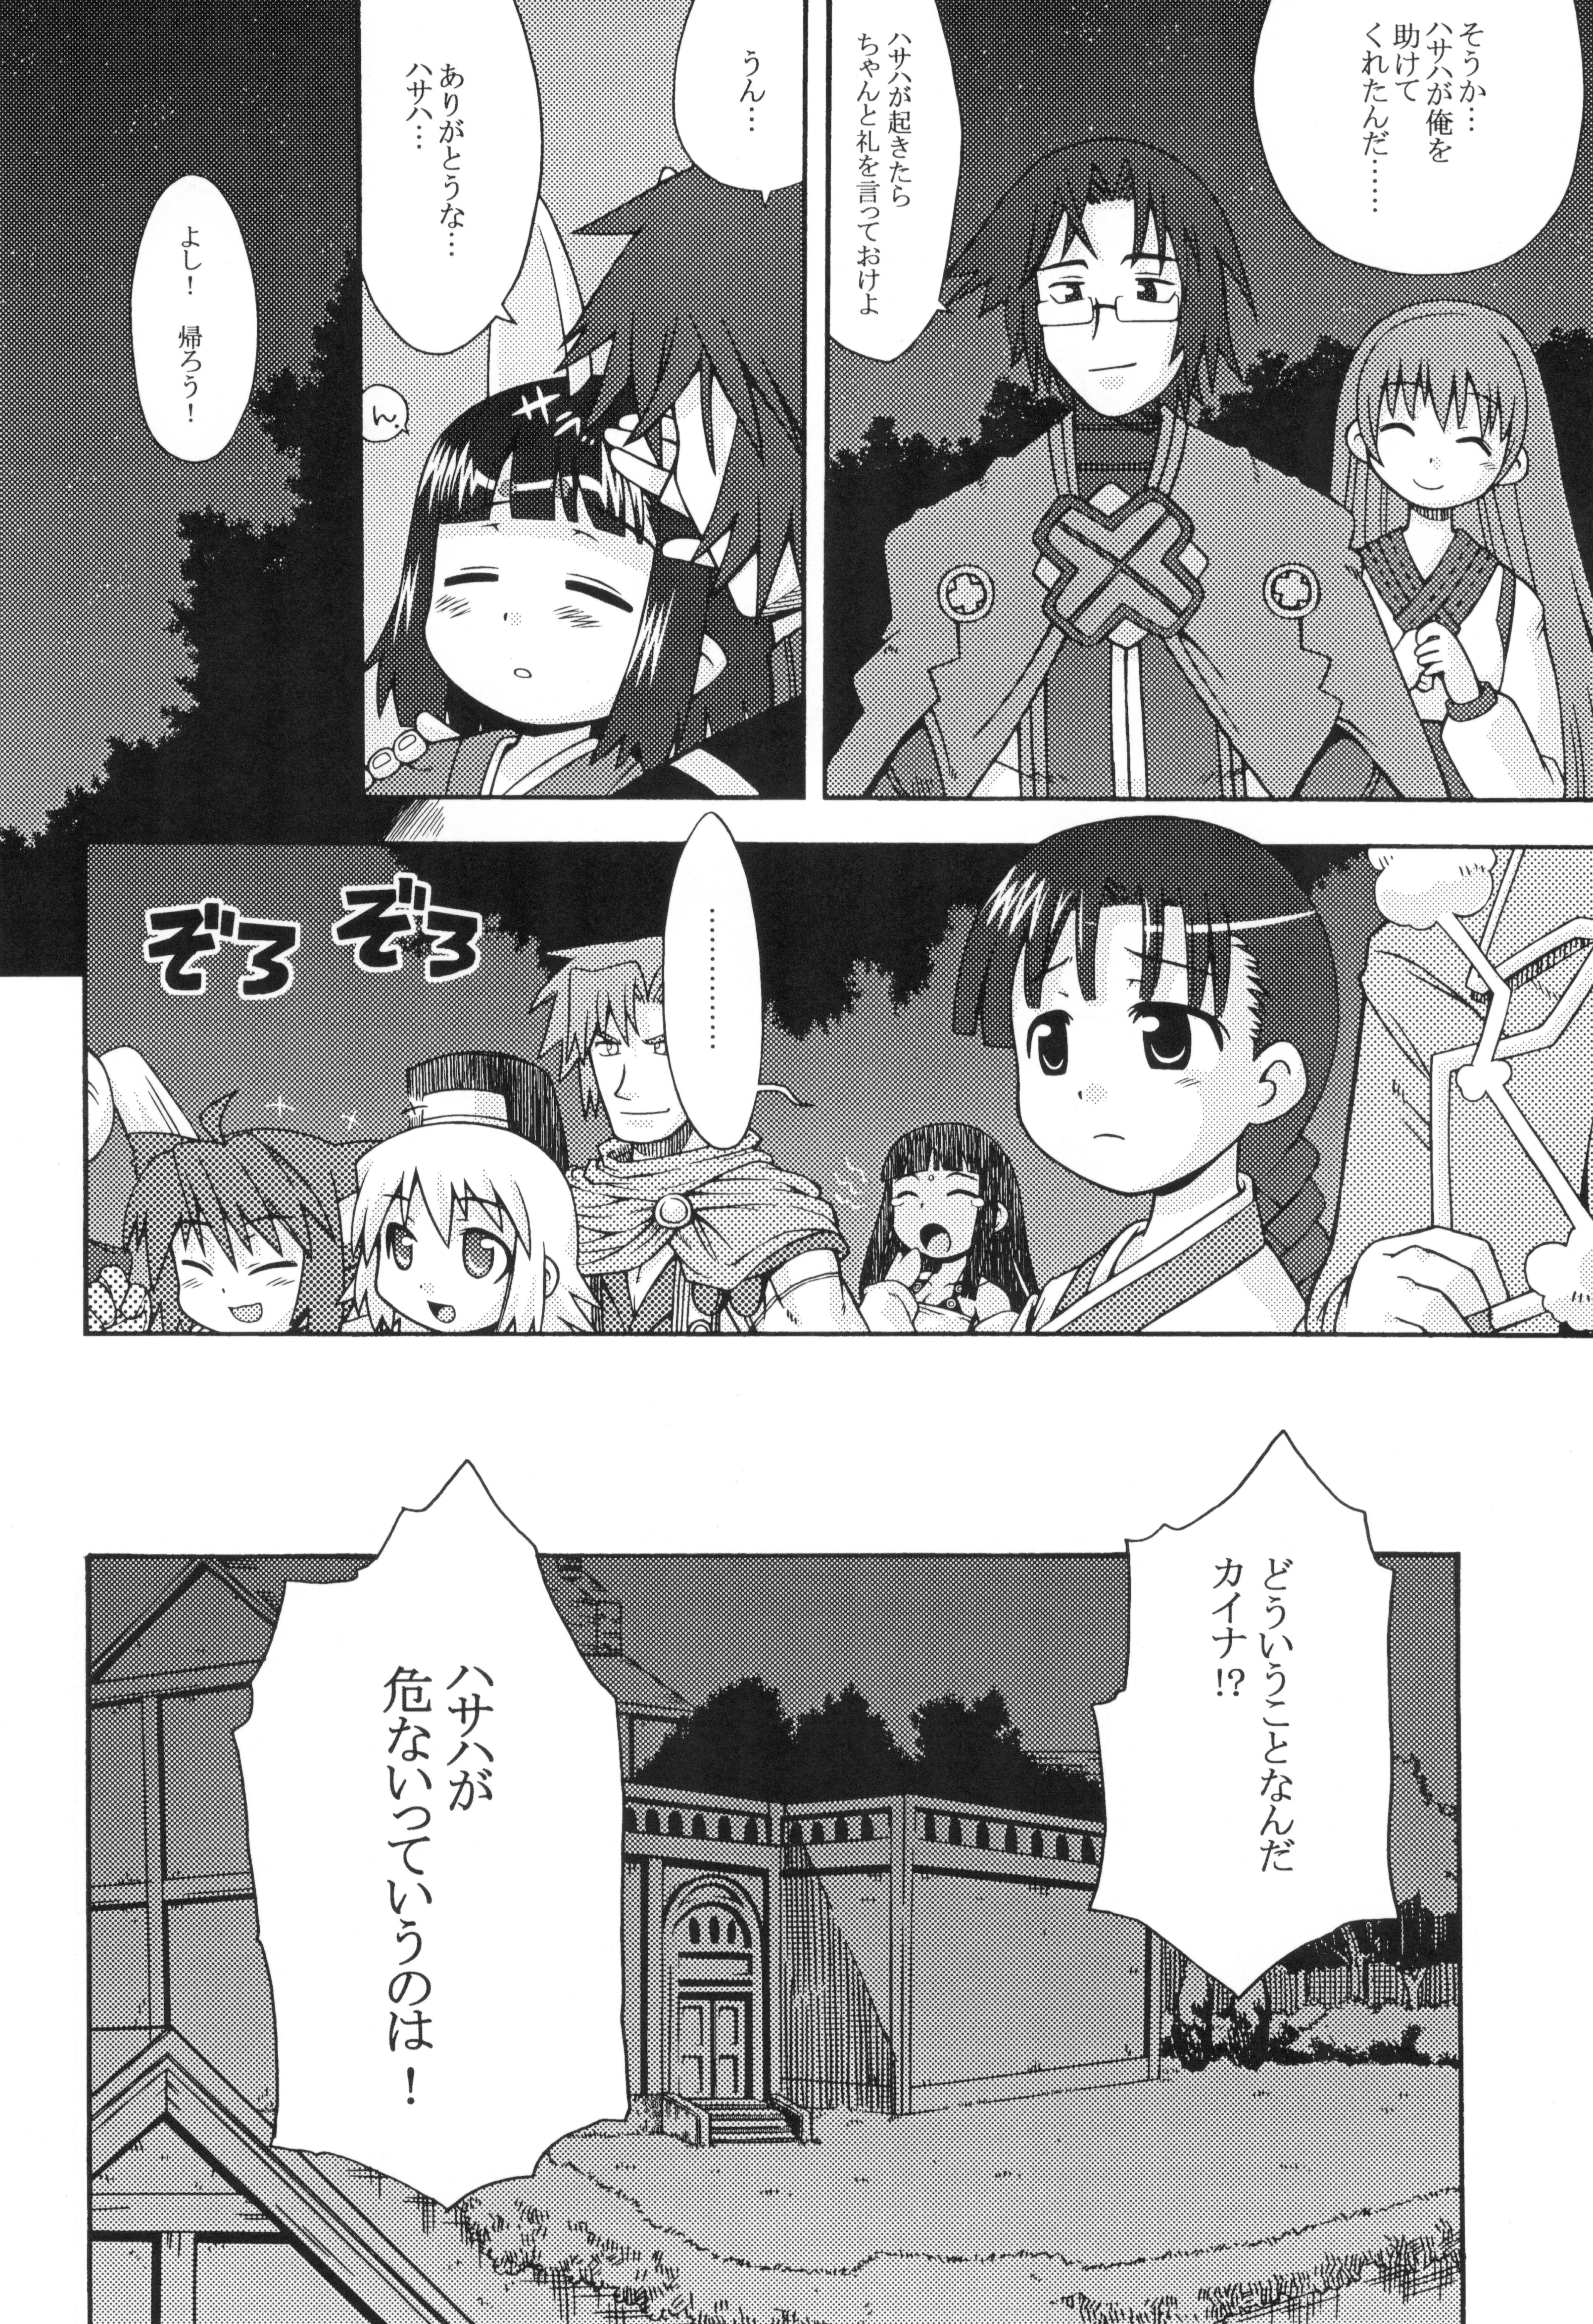 Muscles Hasaha no Anone 2 - Summon night Celebrity - Page 4